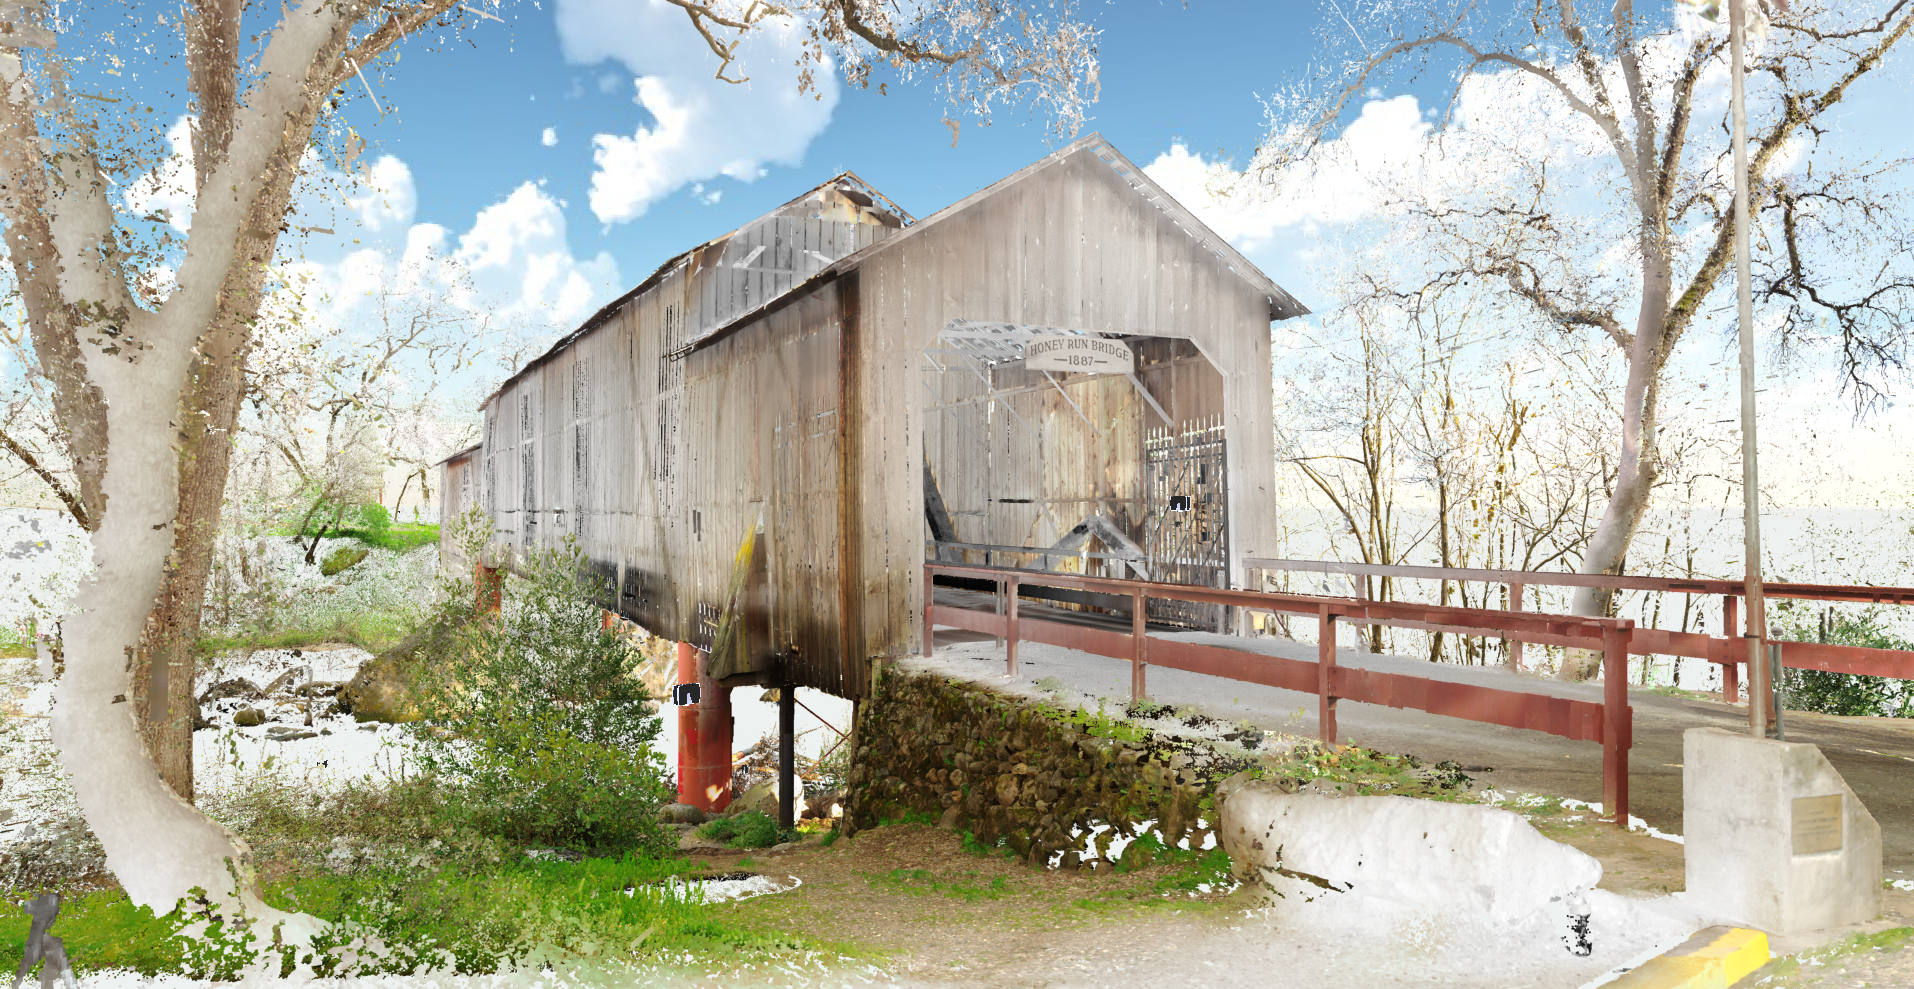 A screenshot of video showing virtual reality rendering of the Honey Run Covered Bridge.